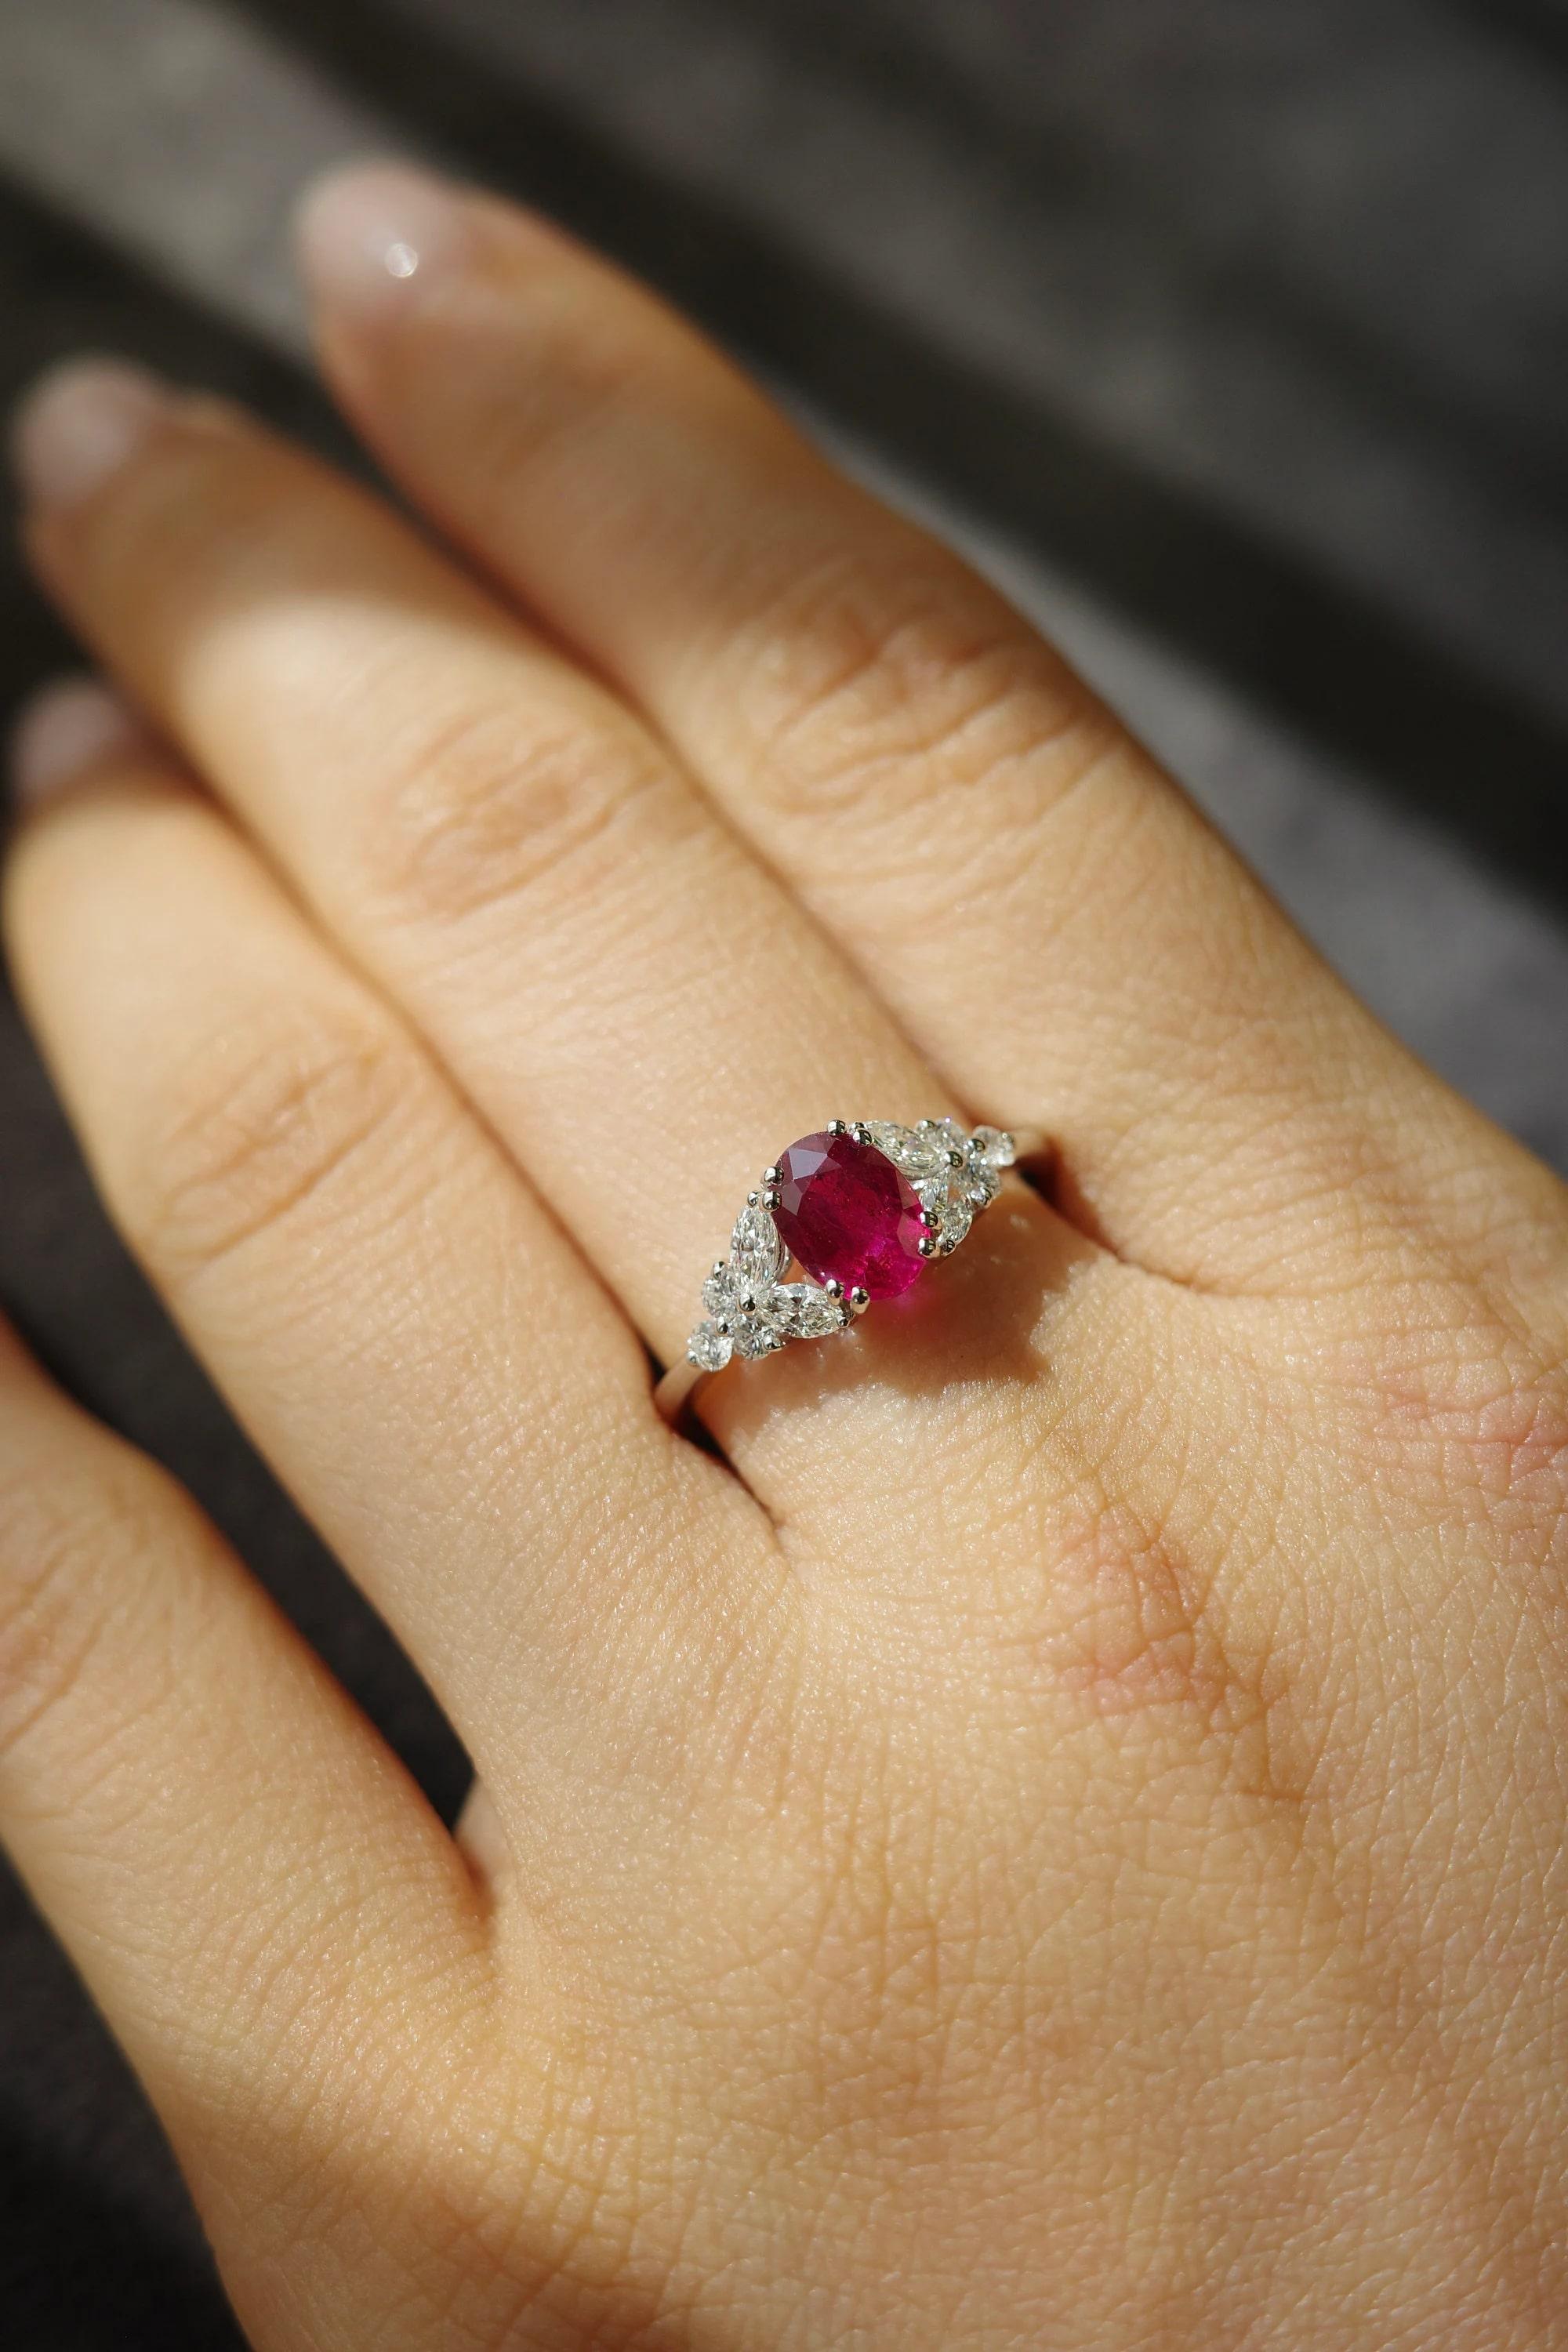 For Sale:  Natural Oval Heated Ruby Engagement Ring   7